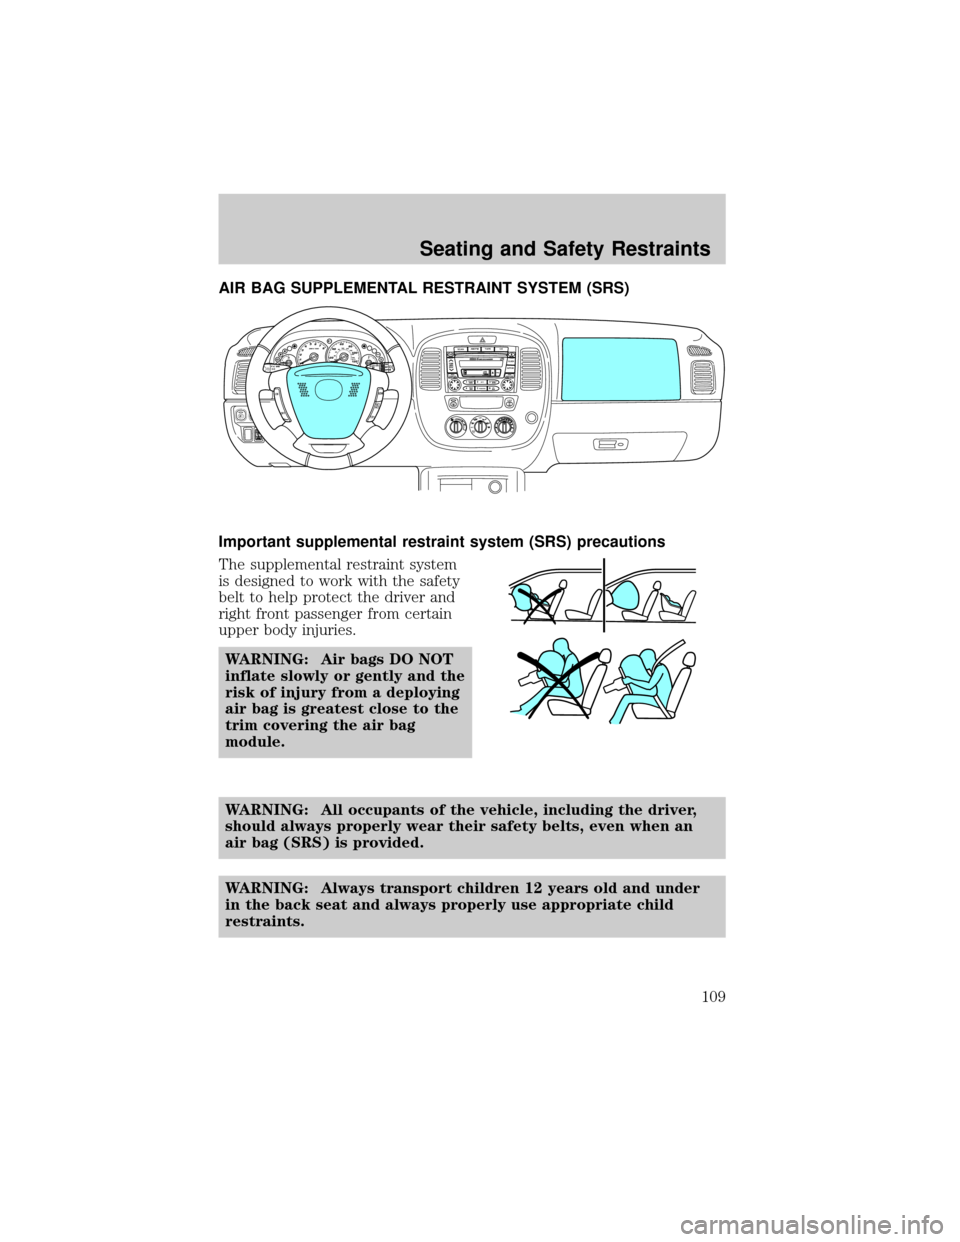 MAZDA MODEL TRIBUTE 2002  Owners Manual (in English) AIR BAG SUPPLEMENTAL RESTRAINT SYSTEM (SRS)
Important supplemental restraint system (SRS) precautions
The supplemental restraint system
is designed to work with the safety
belt to help protect the dri